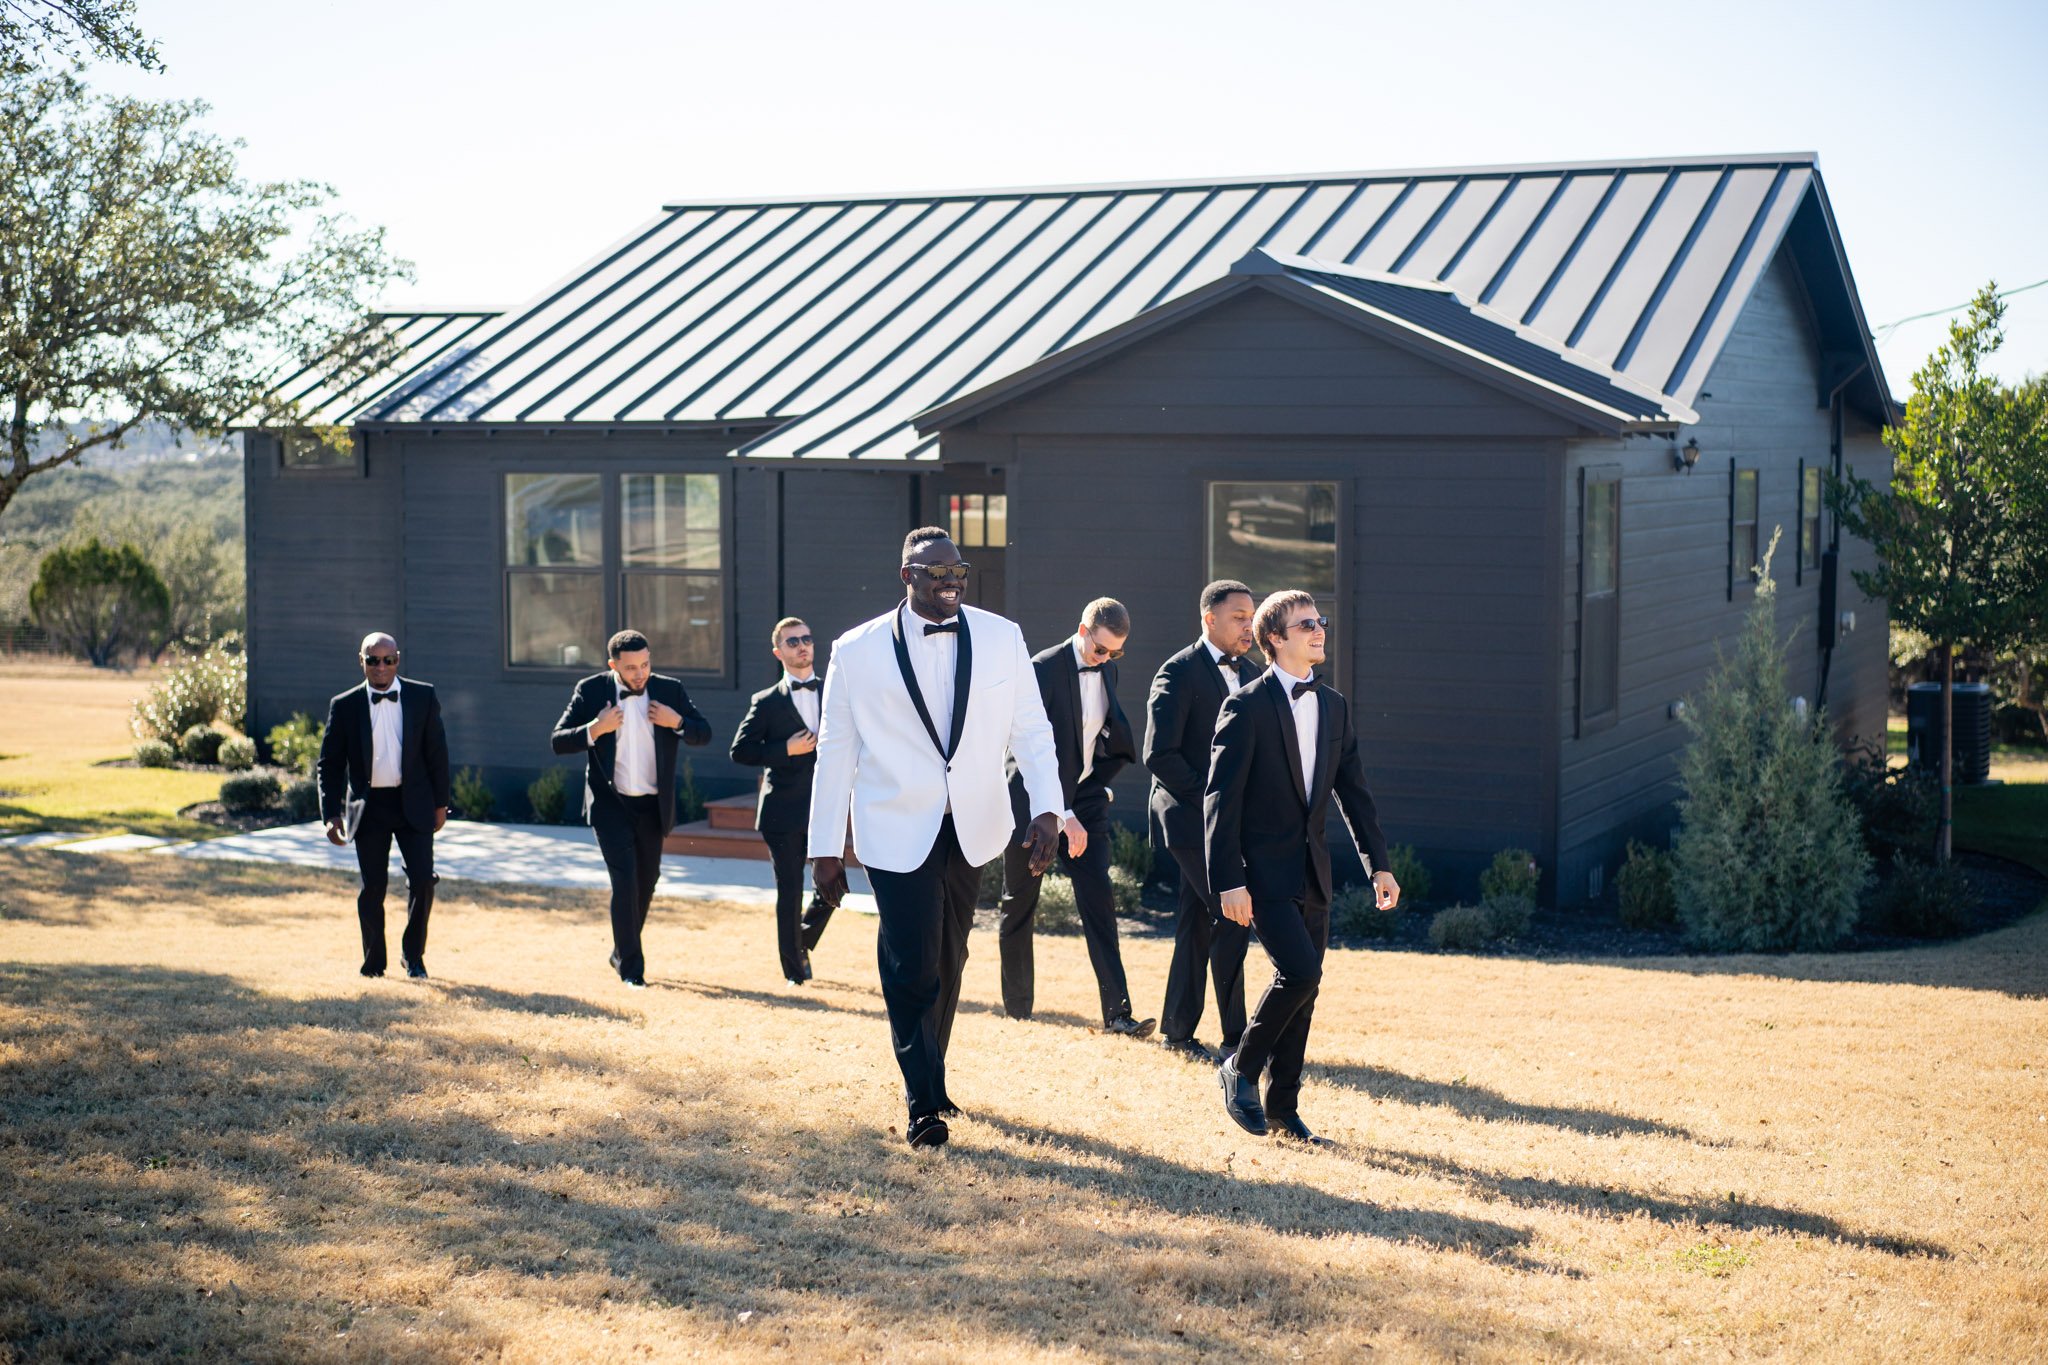 The groom in a white suit jacket walks with groomsmen in black suit jackets at the Arlo The Amber studio